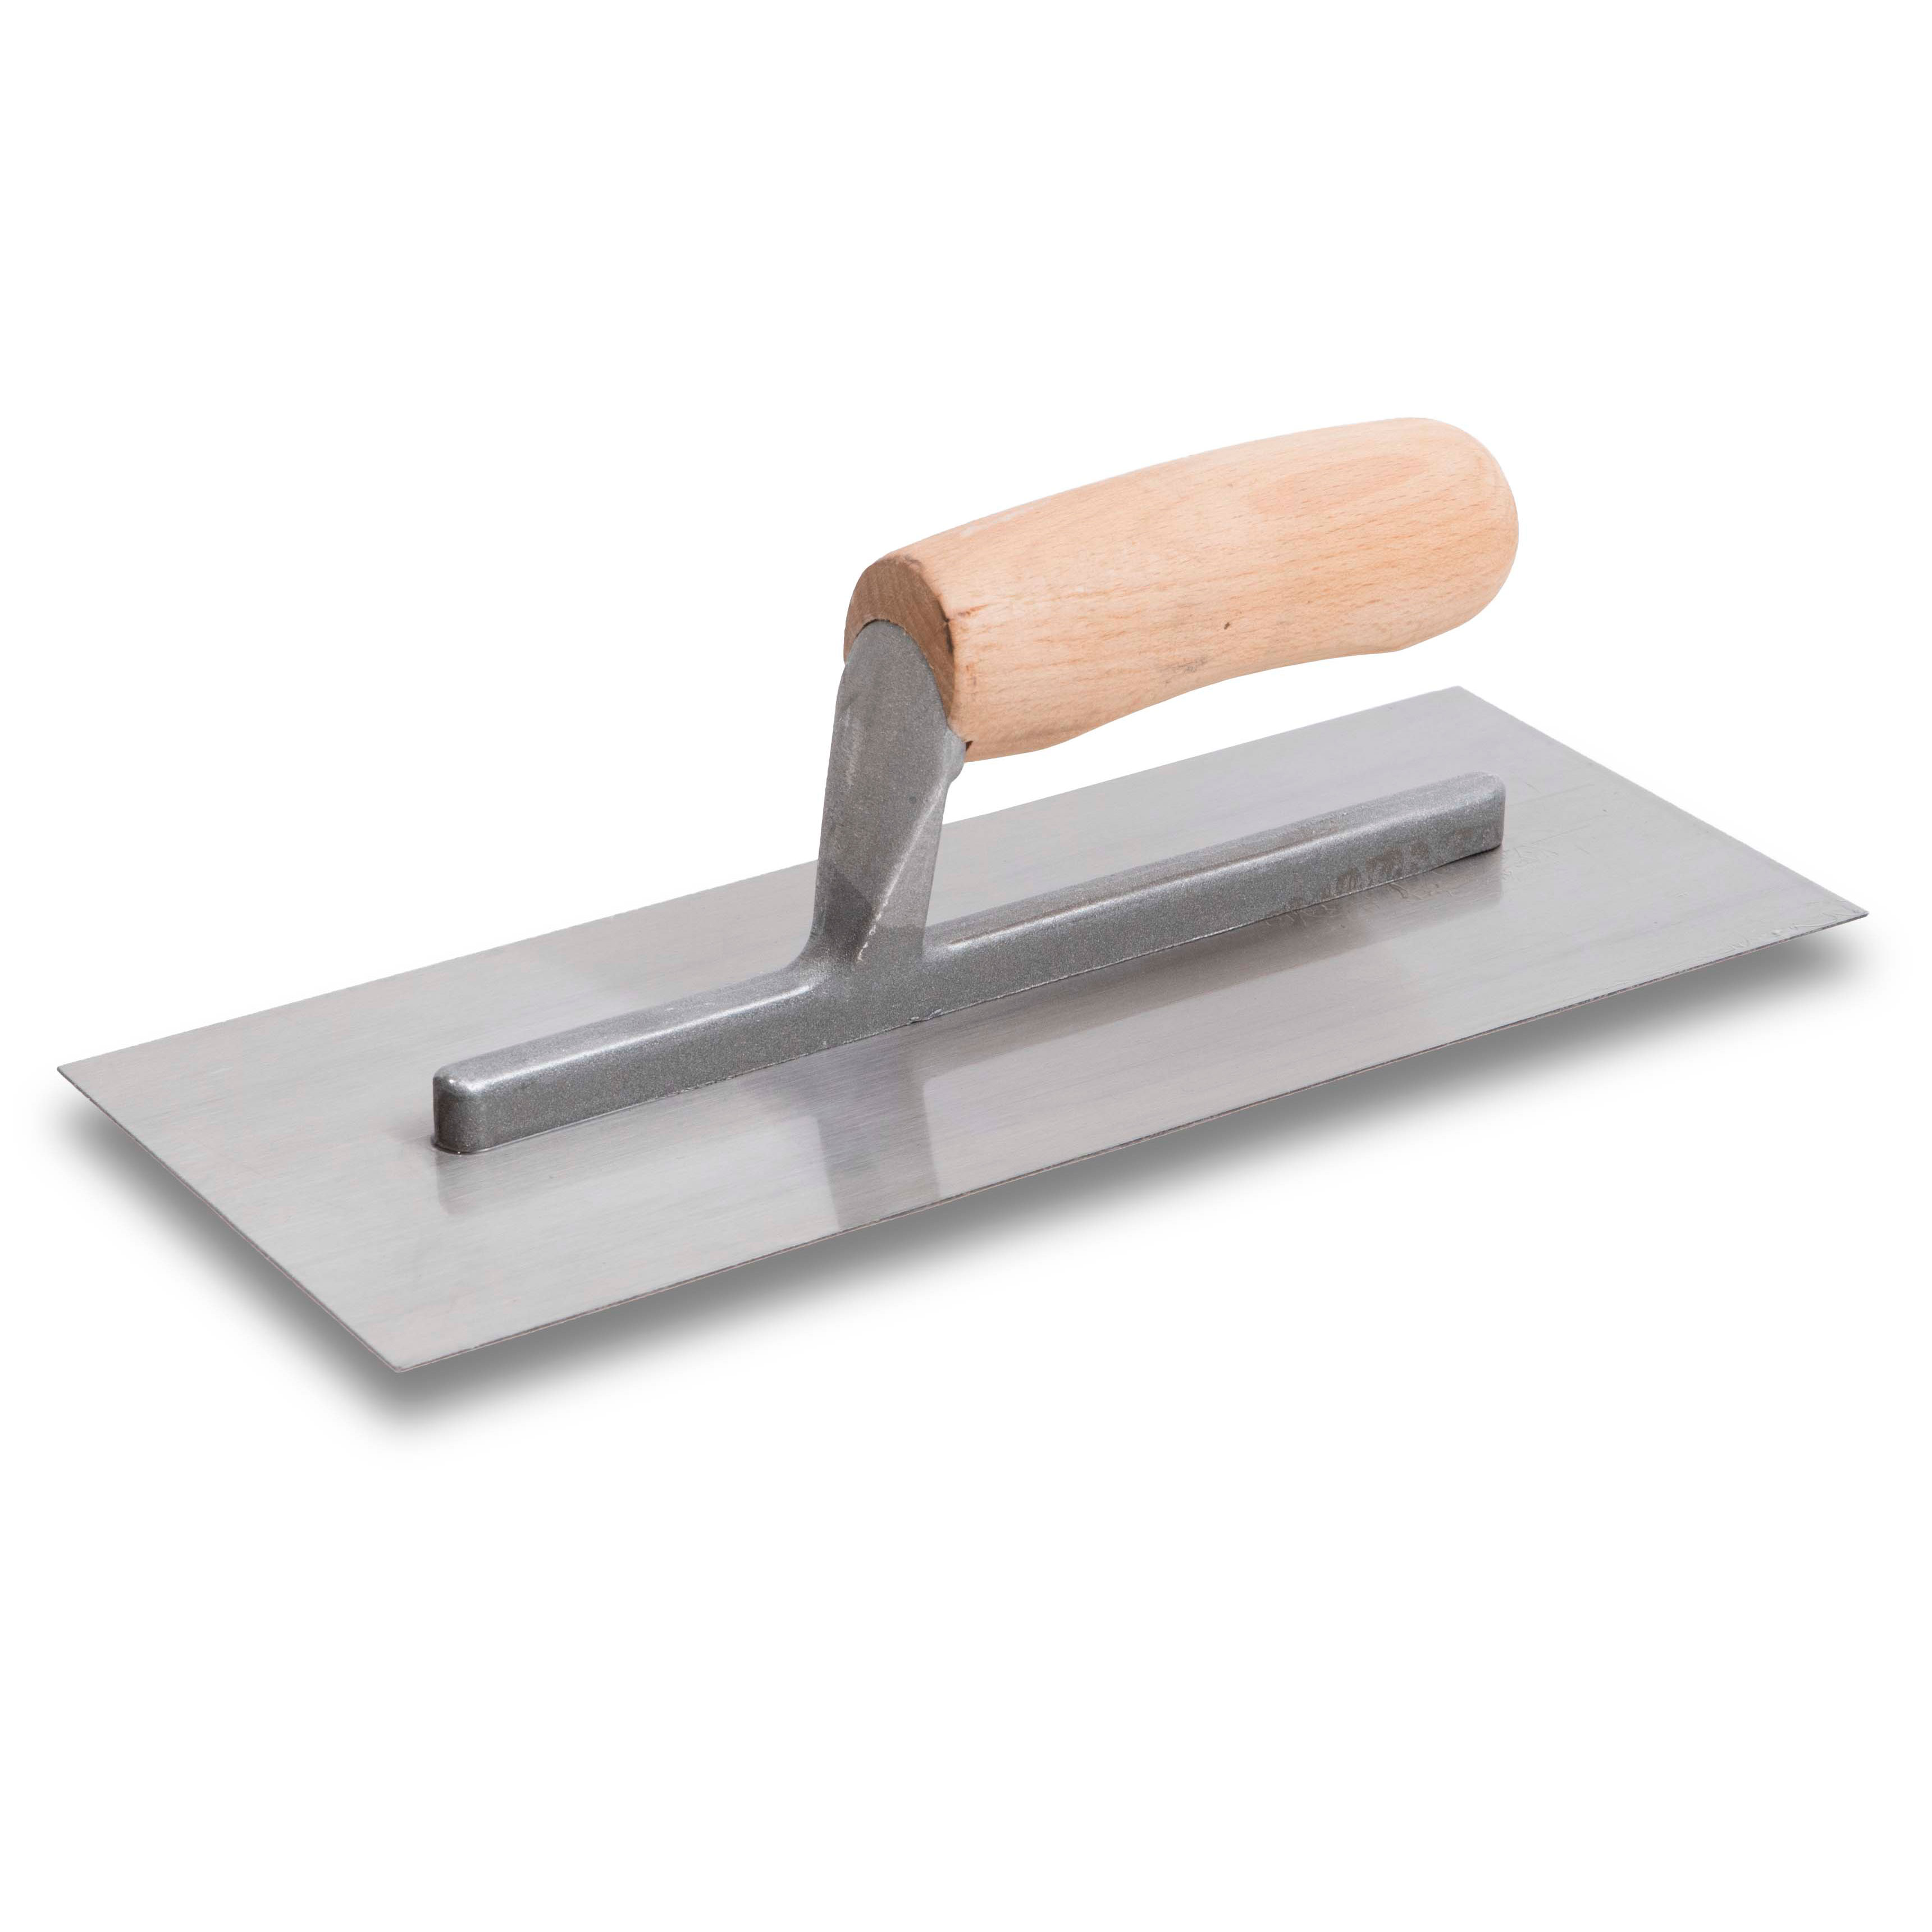 Marshalltown 990S 11in x 4-1/2in Finishing Trowel with Curved Wood Handle 990S